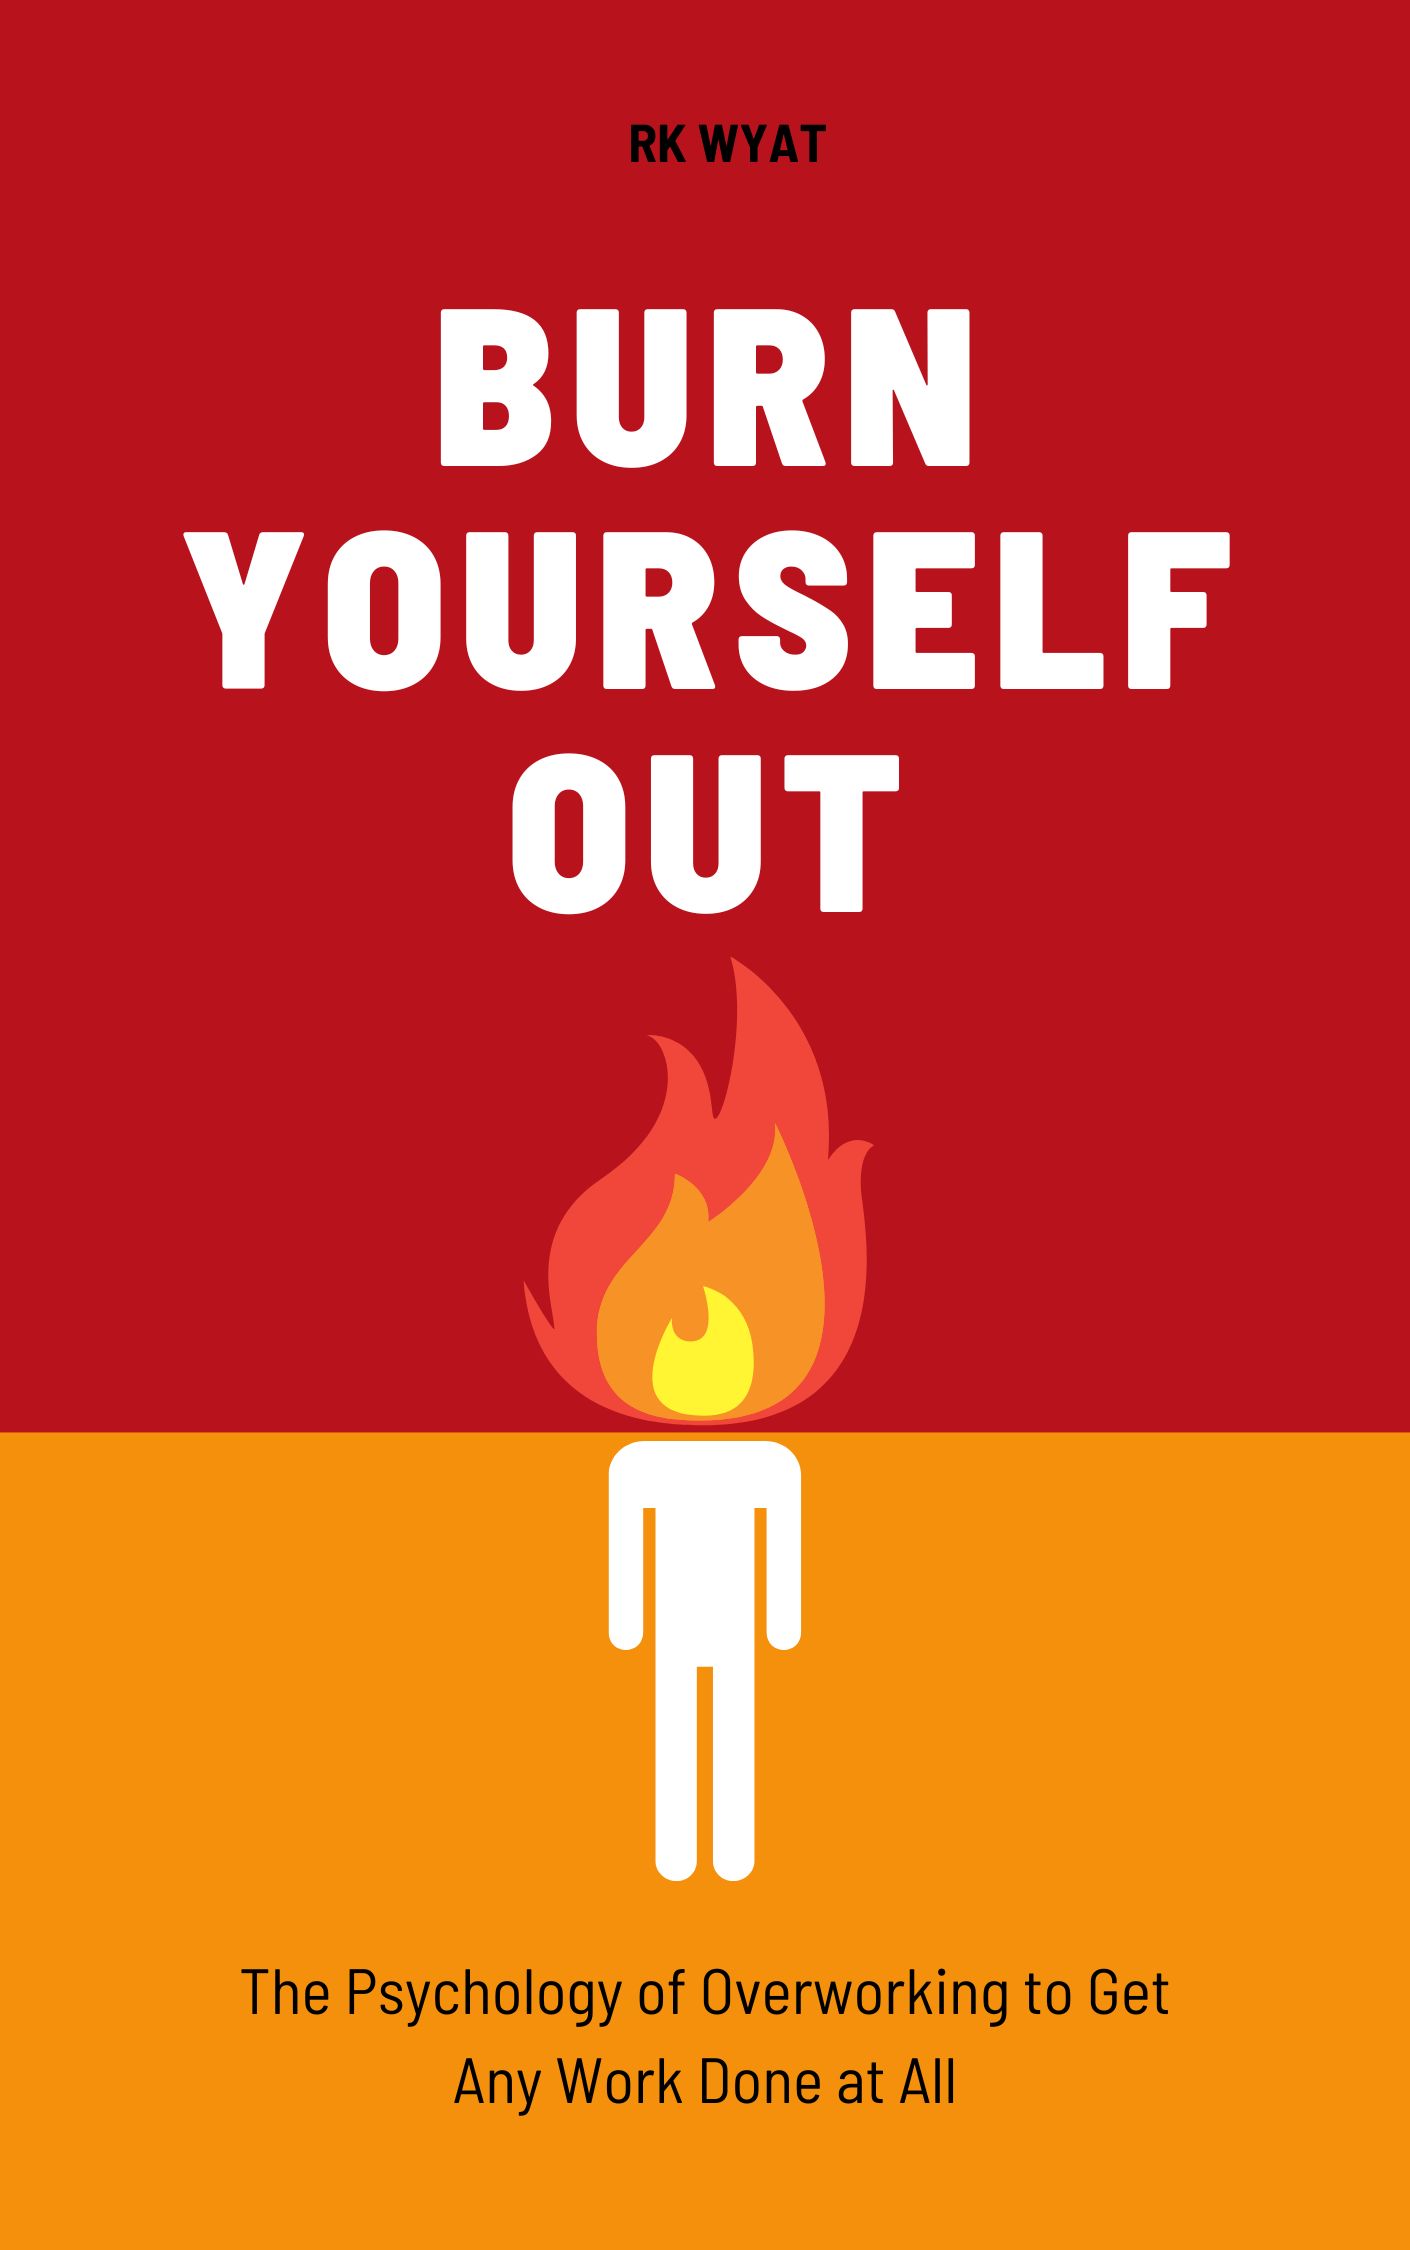 RK Wyat: Burn Yourself Out